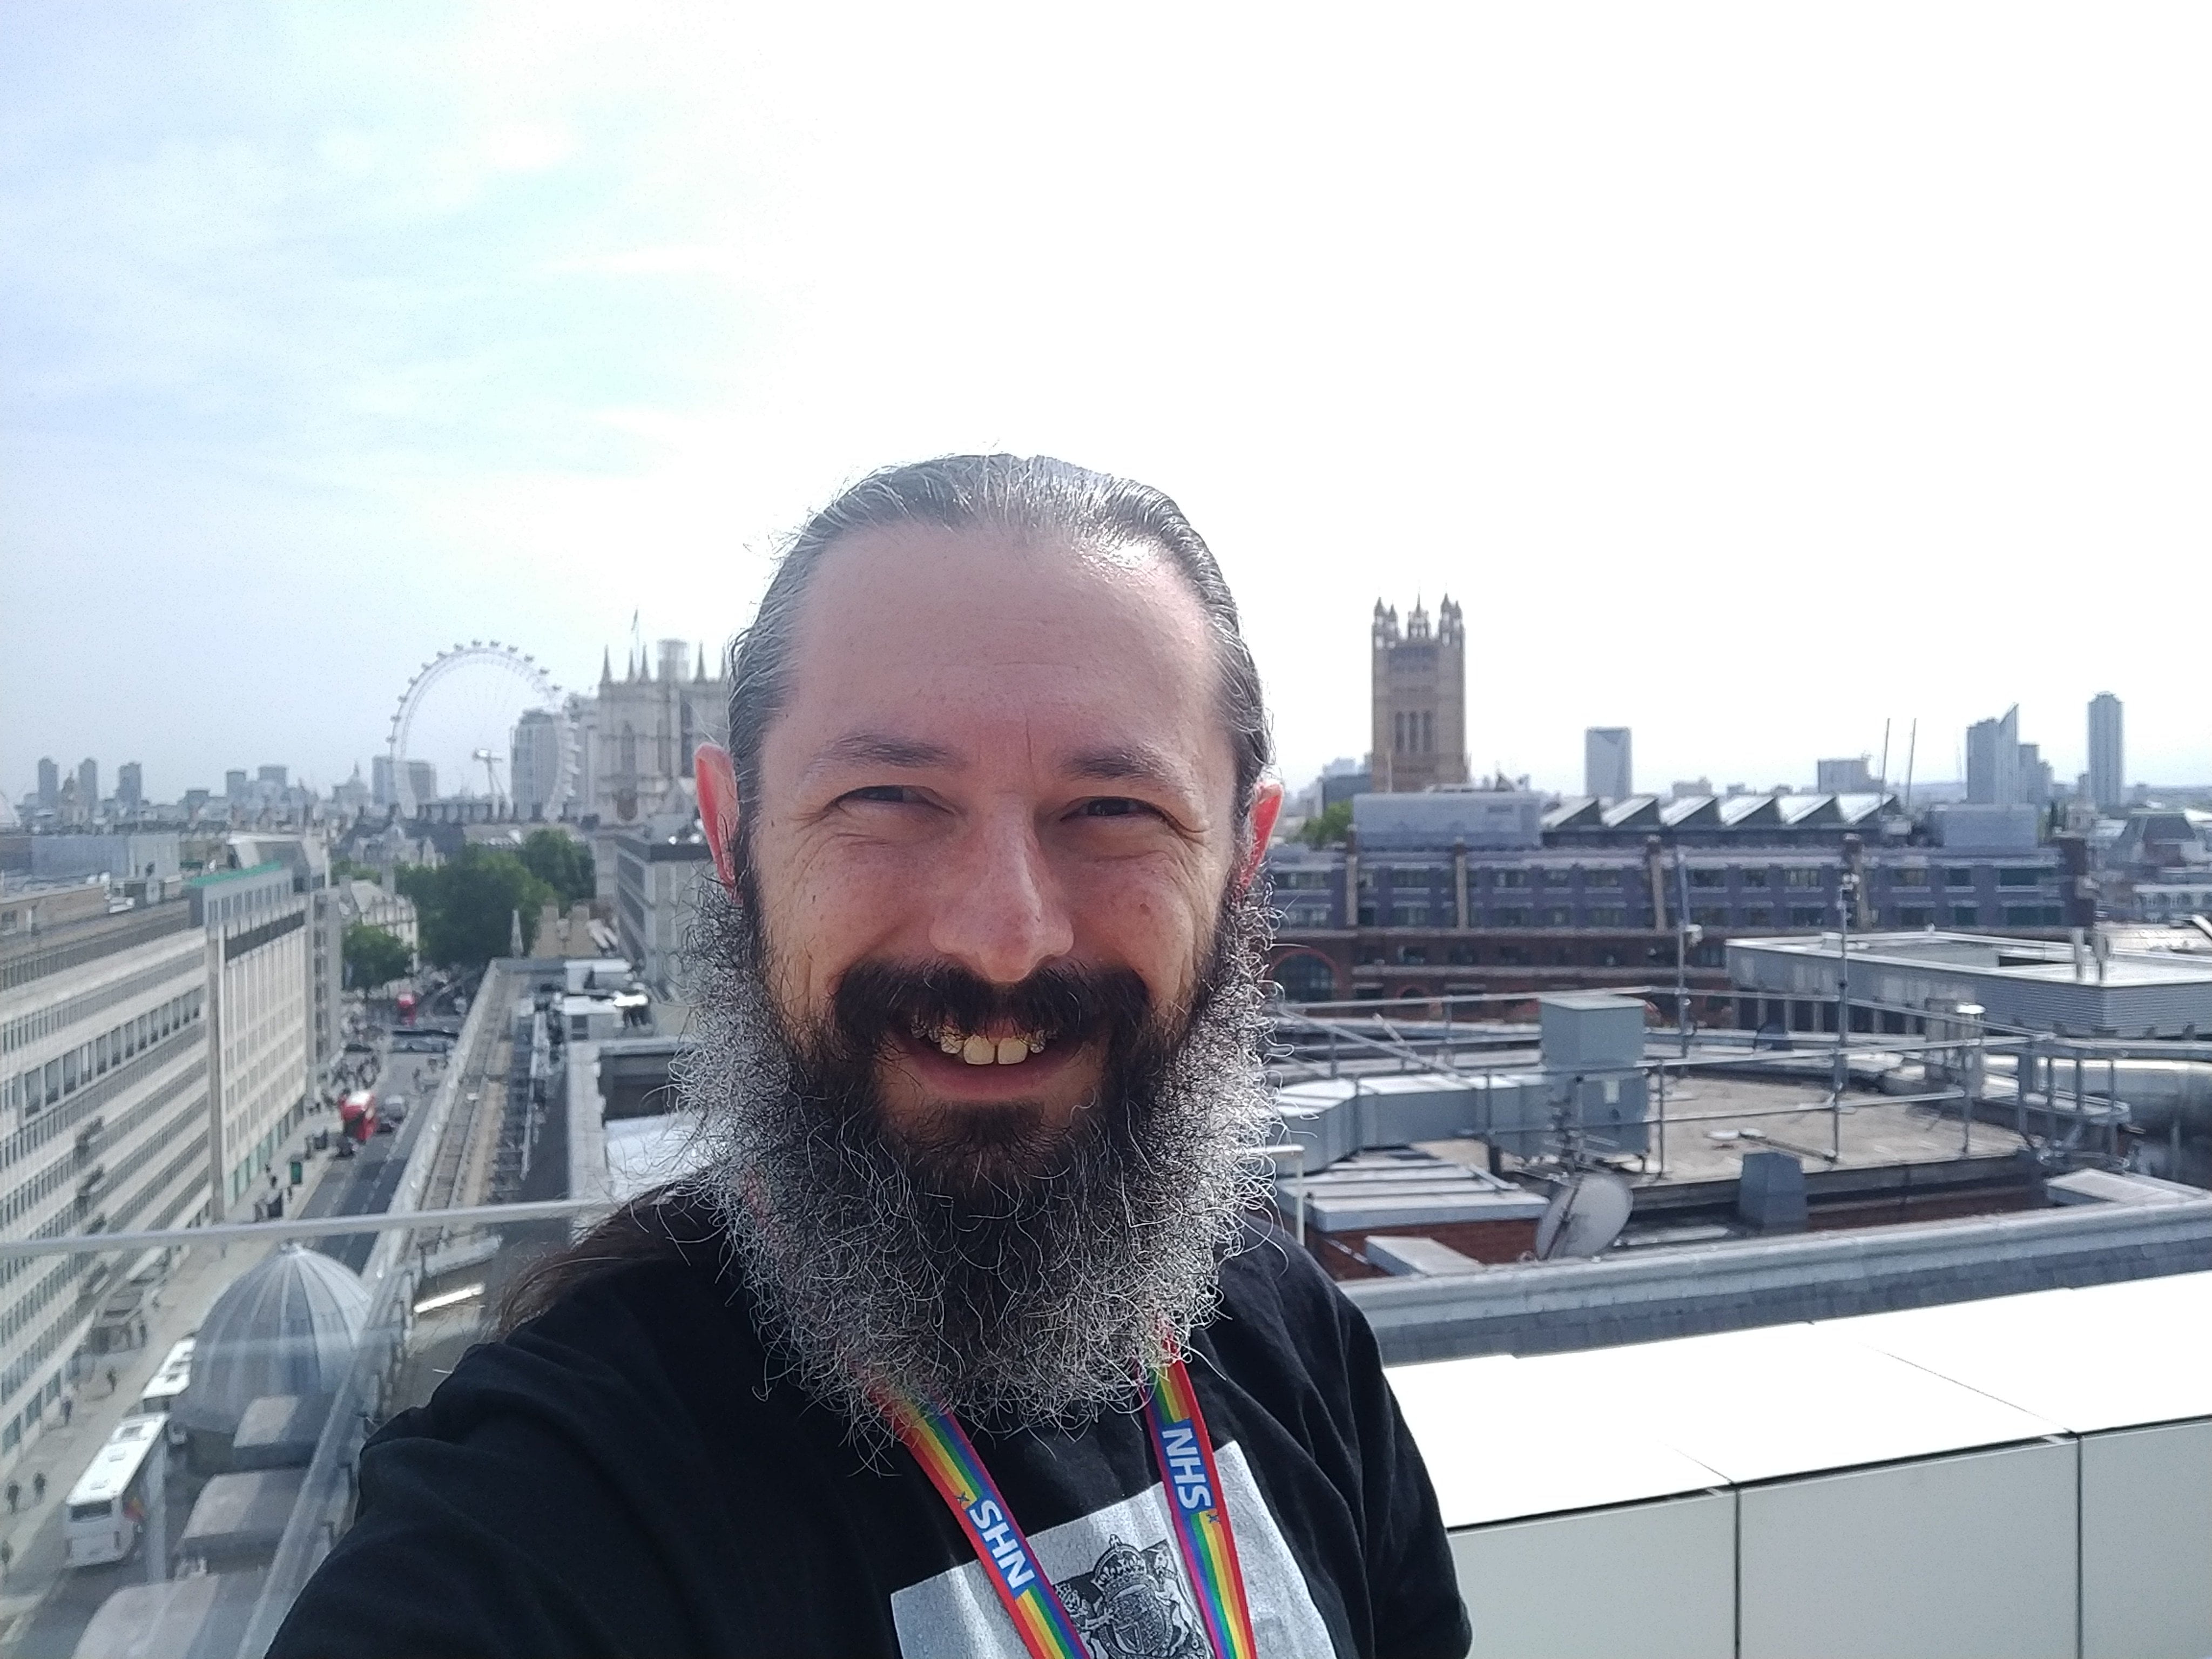 Selfie of me standing on a London roof. The palace of Westminster is in the background.